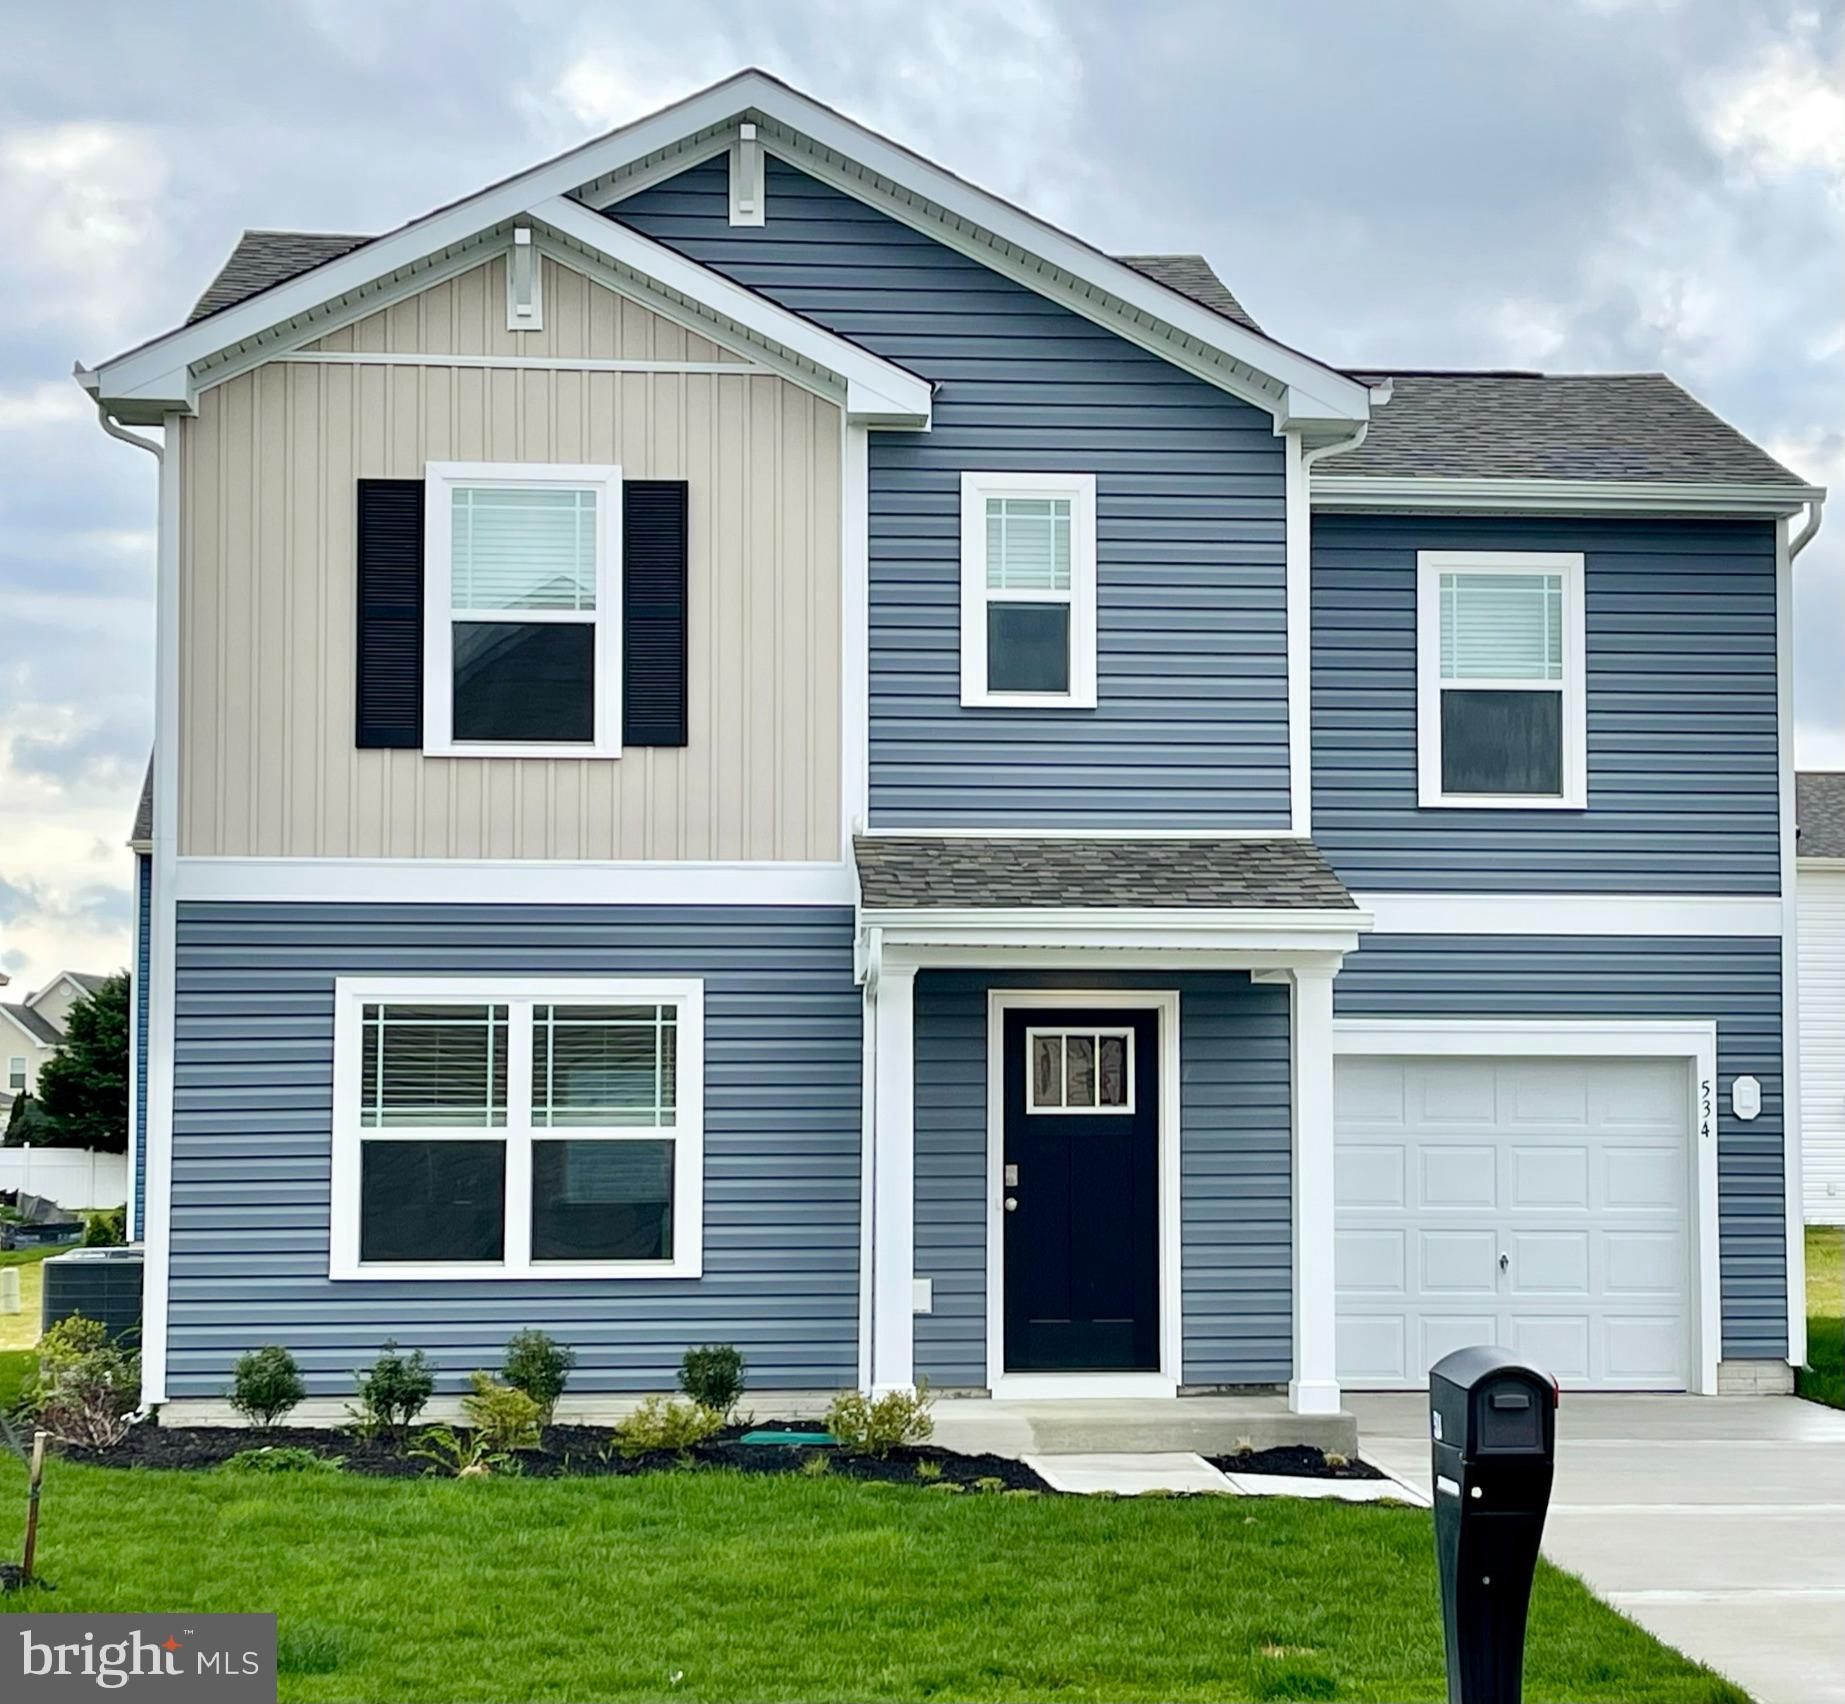 New move-in ready home, the Essex is a cozy two-story home with three bedrooms, two-and-a-half bathr